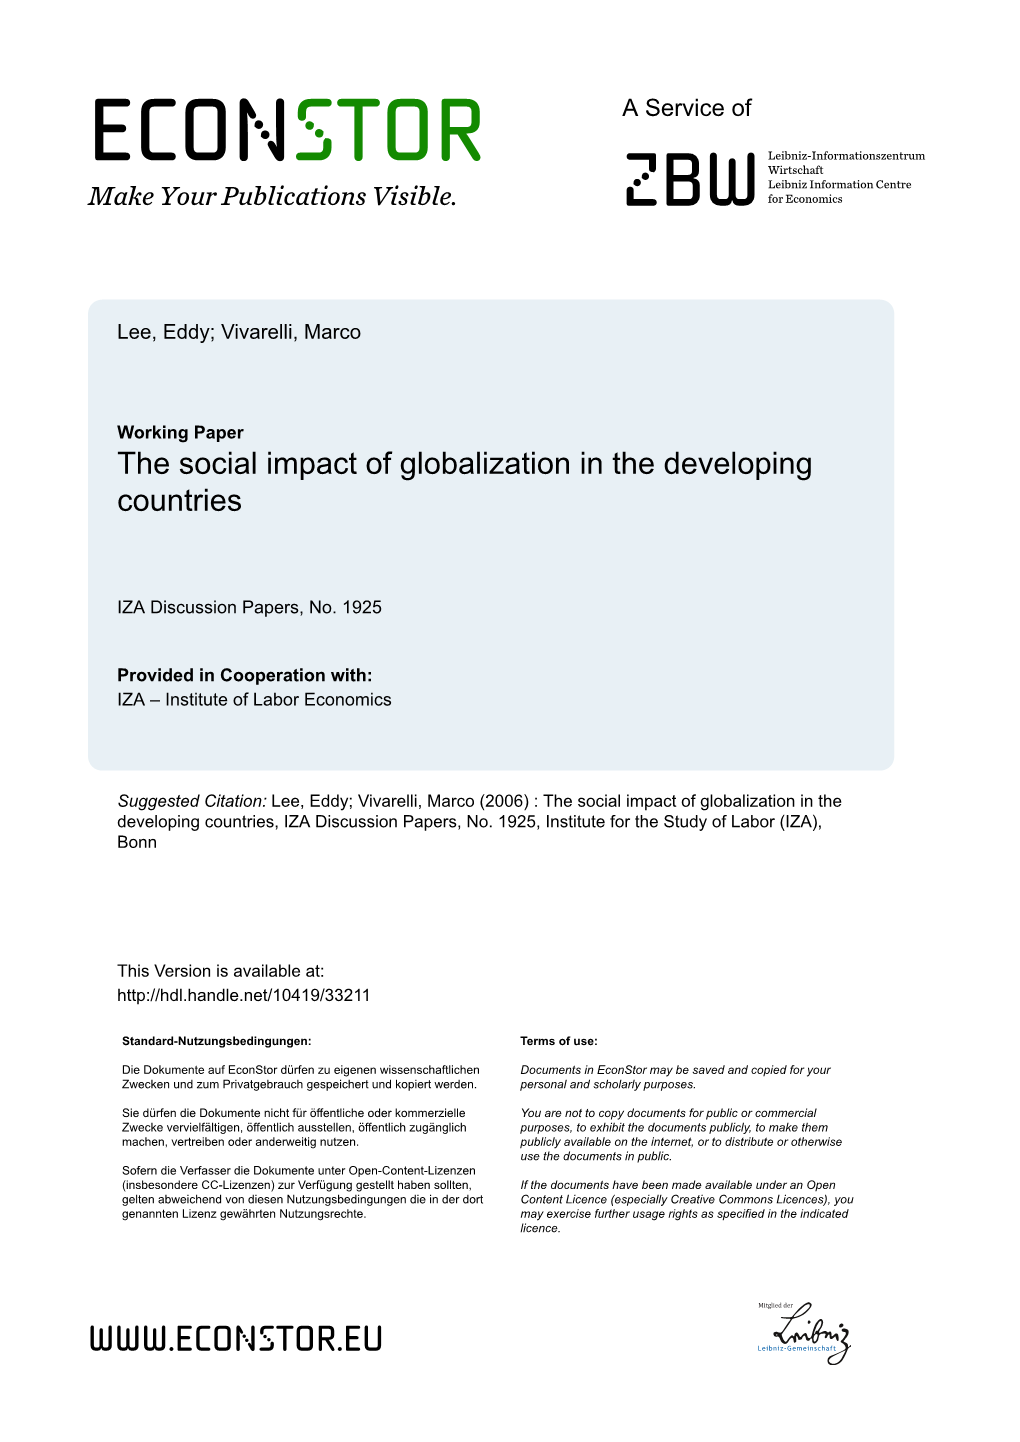 The Social Impact of Globalization in the Developing Countries